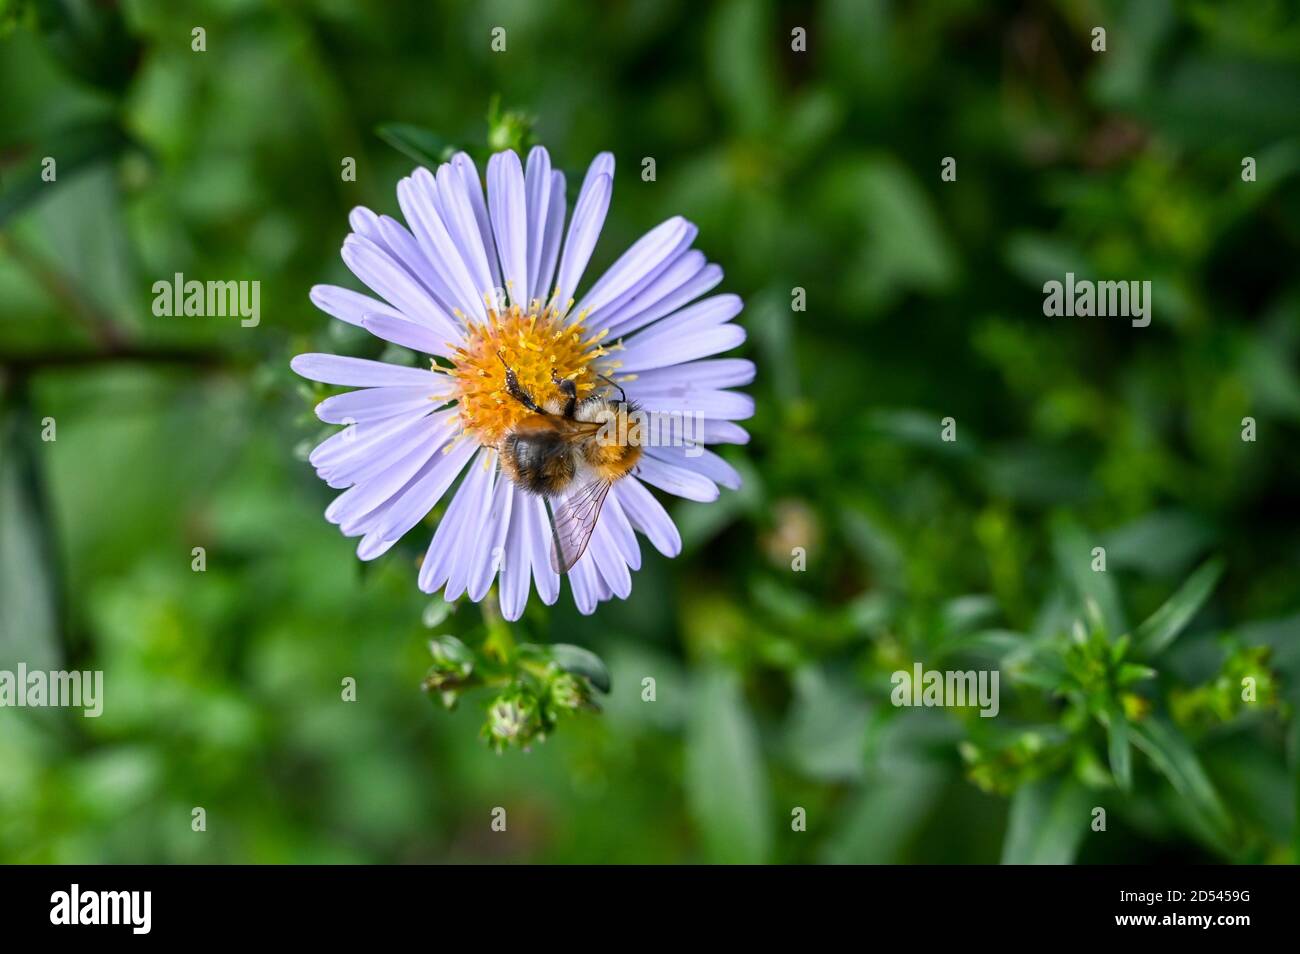 A bee pollinating a single mauve aster flower. Stock Photo